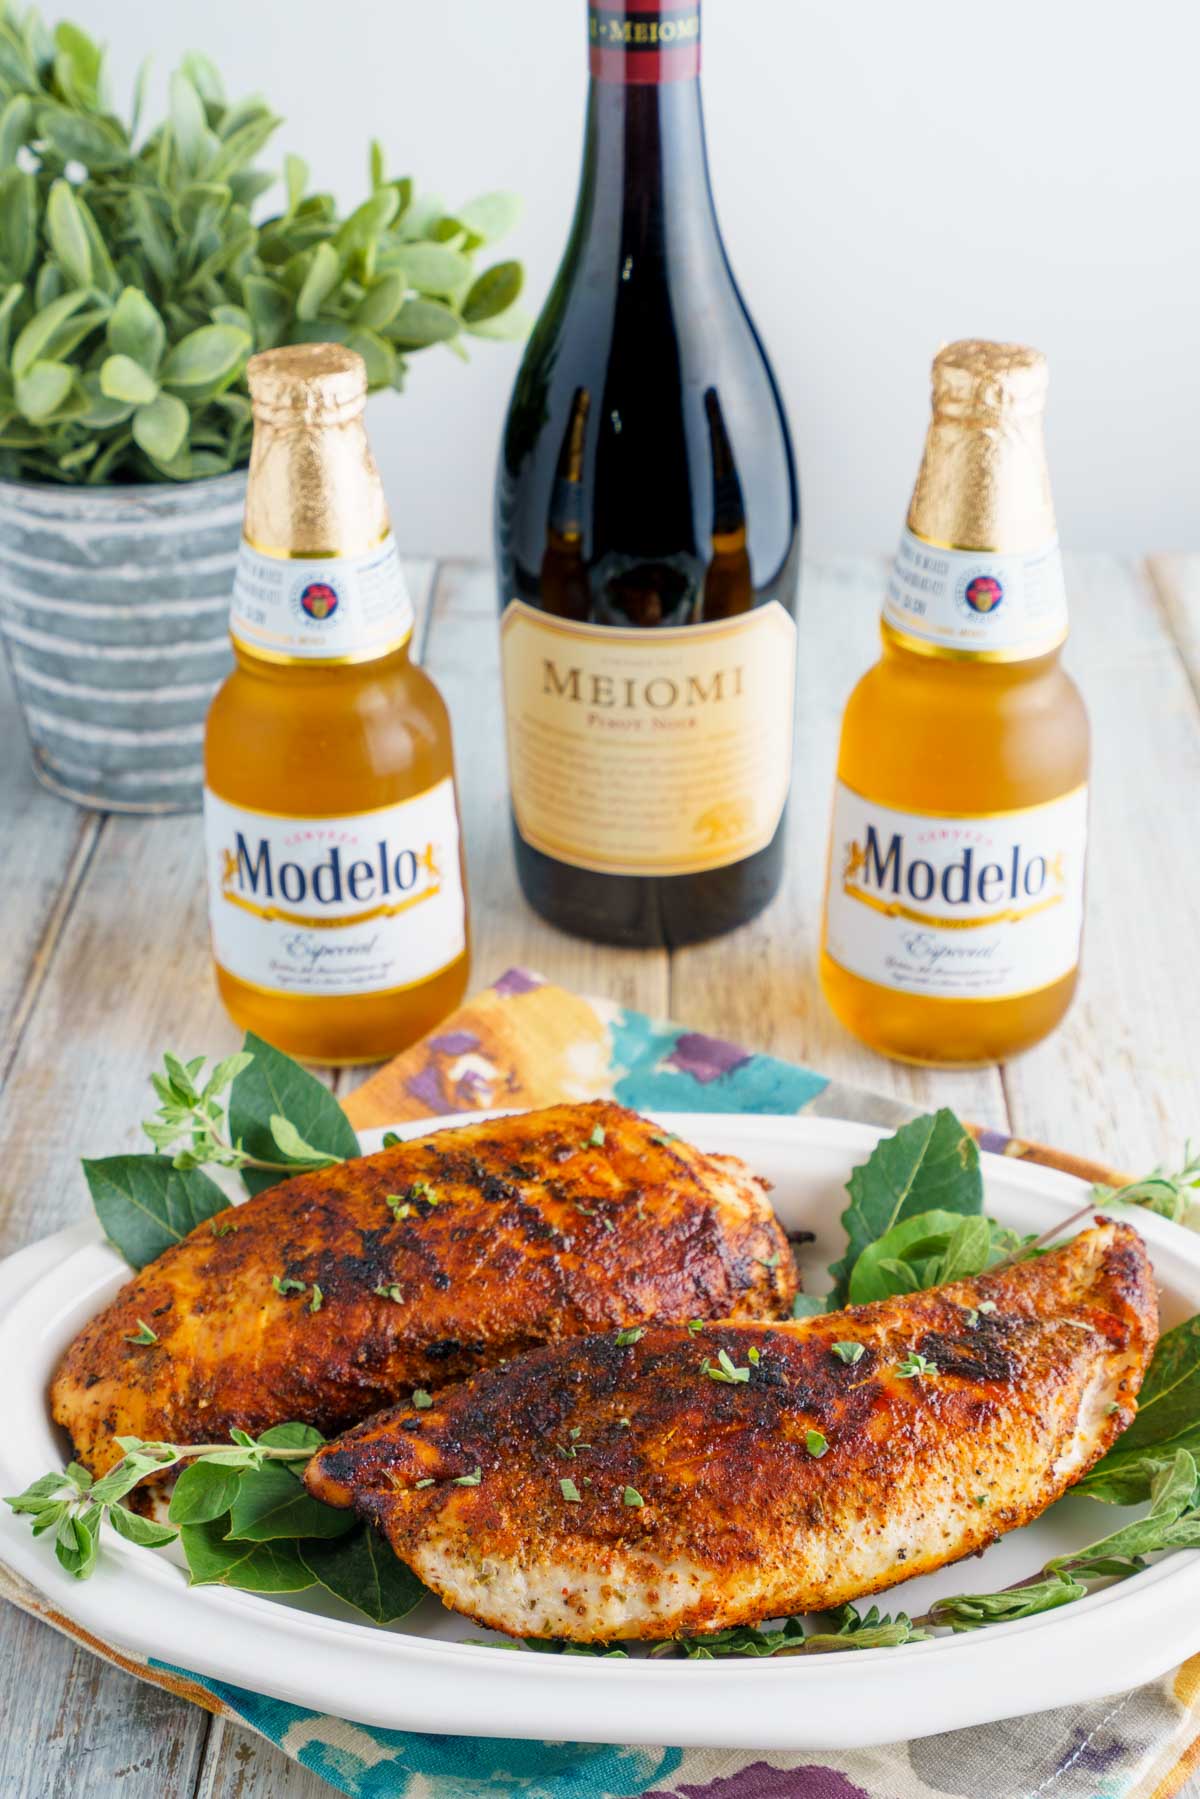 a bottle of red wine and 2 Modelo beers next to a plant and a platter of cooked blackened turkey fillets.